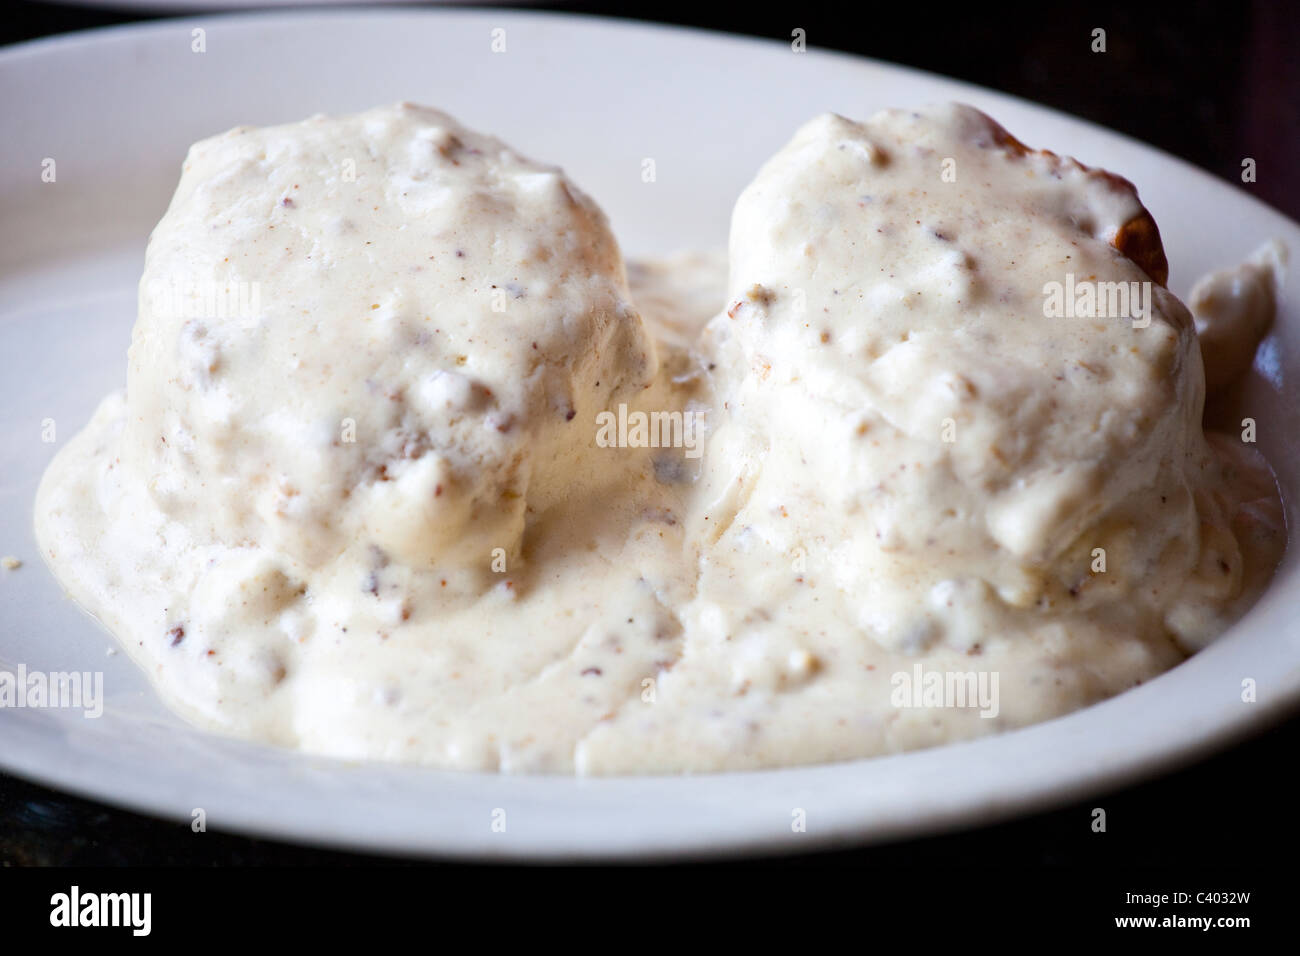 Biscuits and Gravy at No Frill Grill, Norfolk, VA Stock Photo